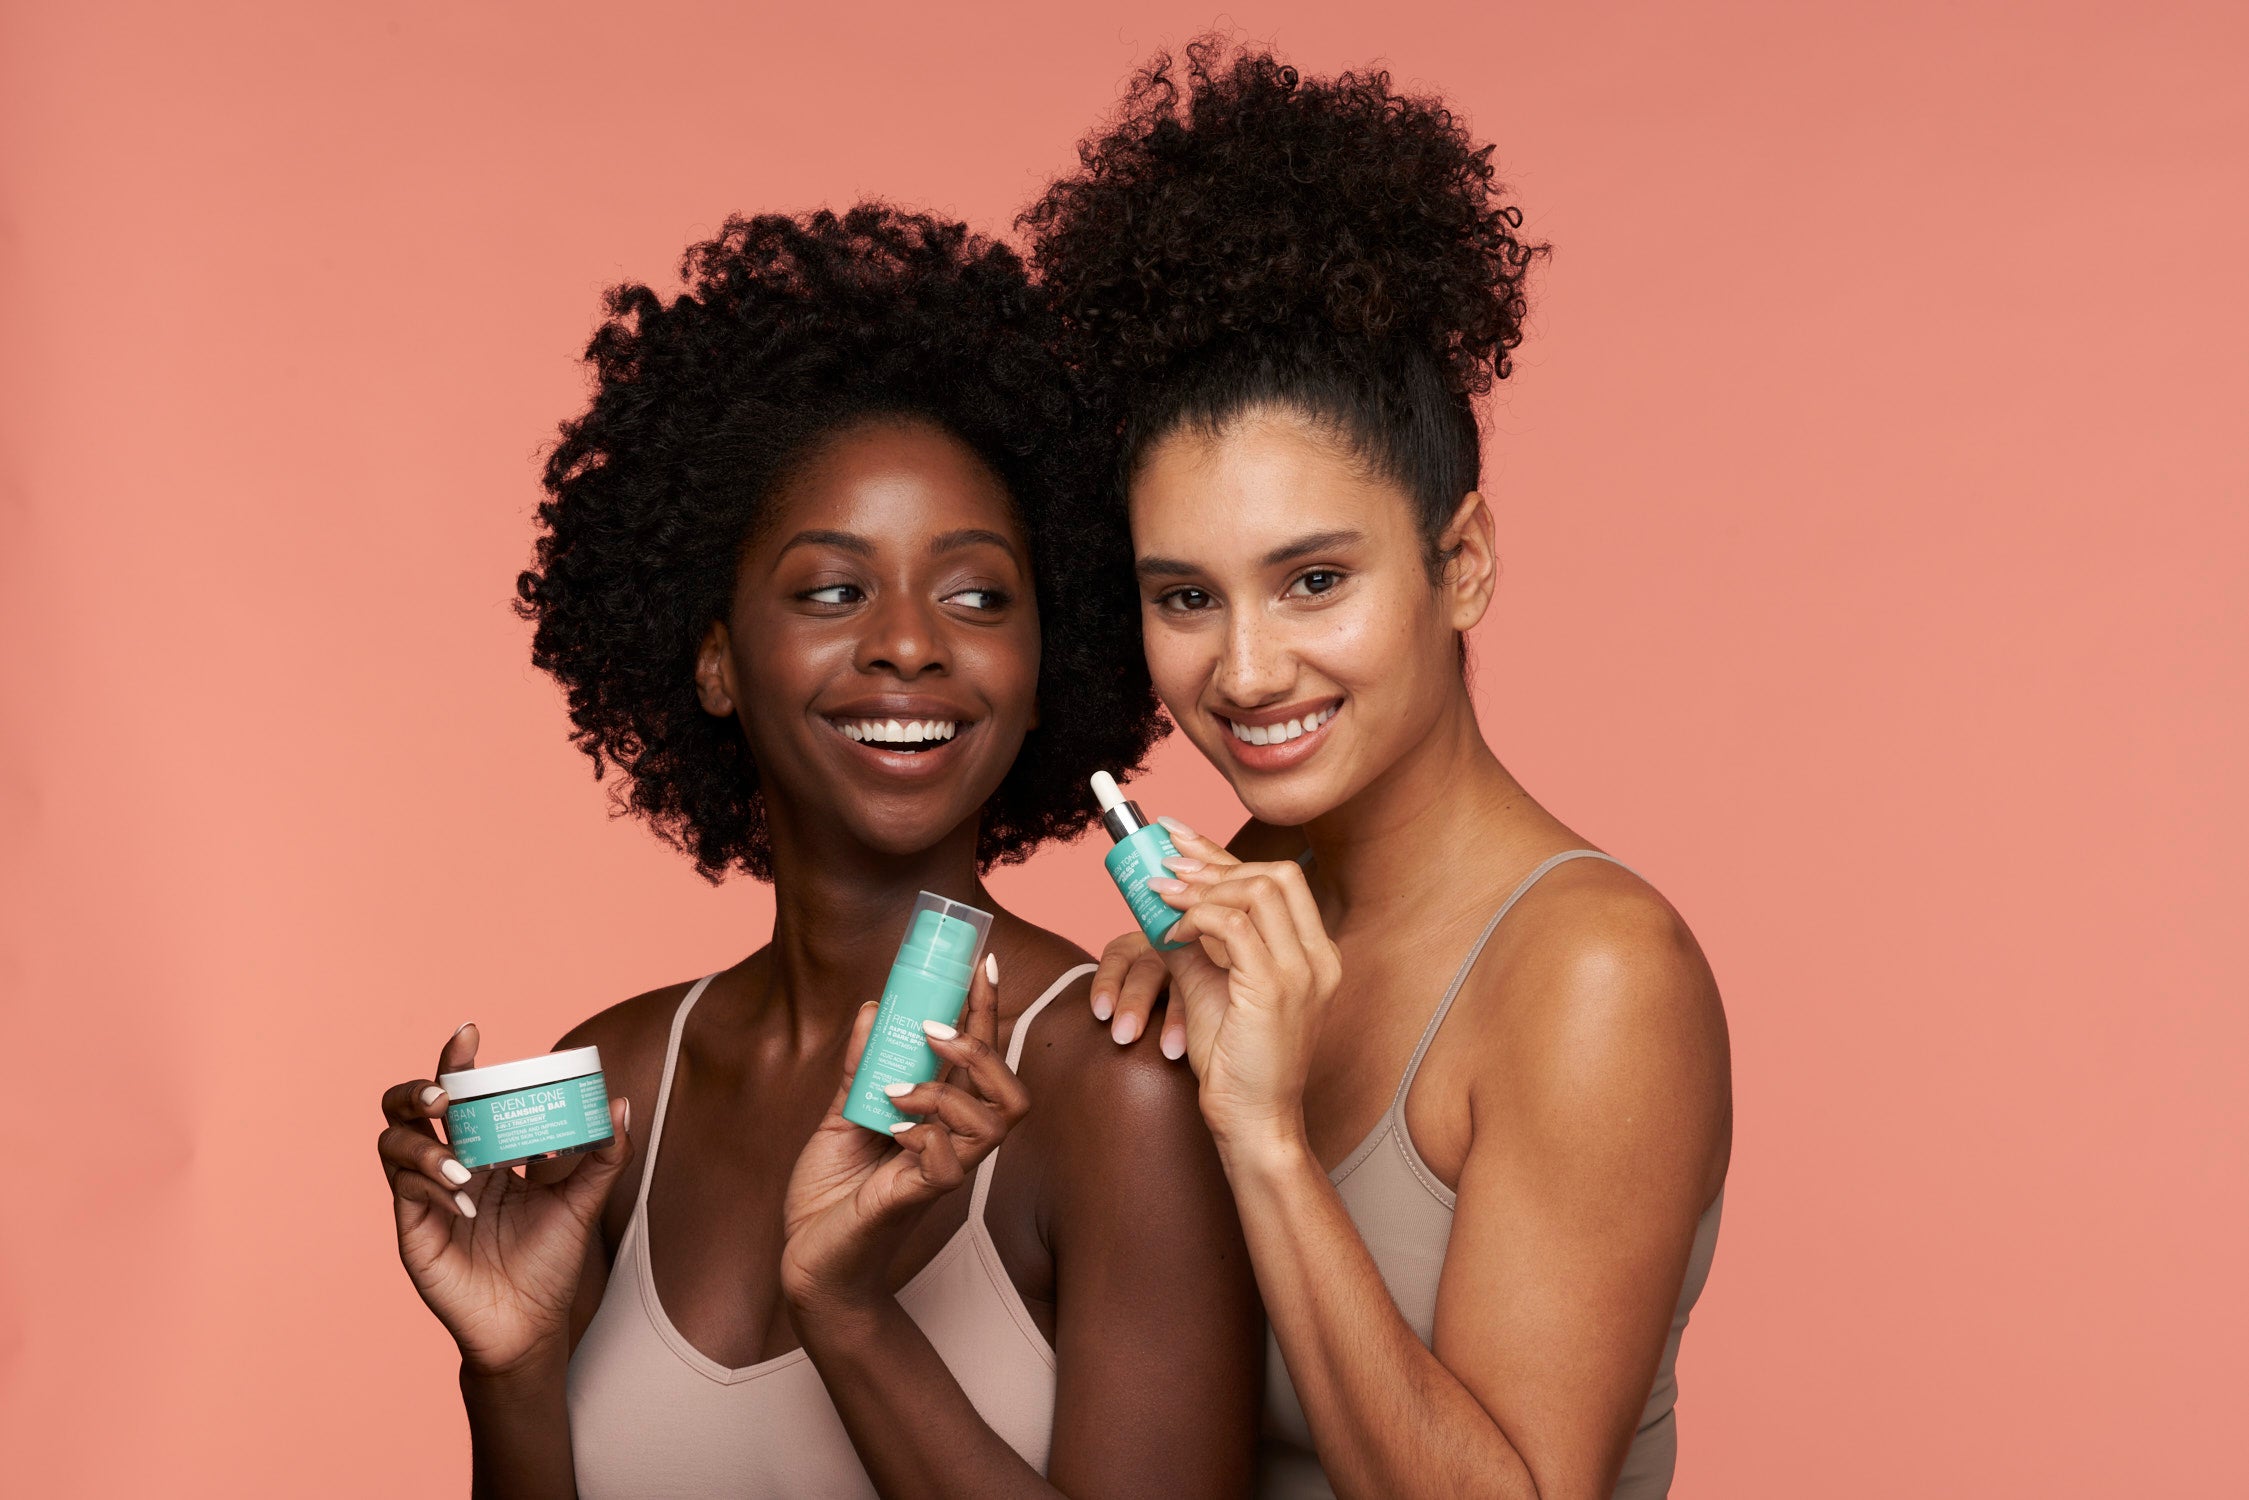 Two diverse woman of melanated complexions holding Urban Skin Rx® products while smiling